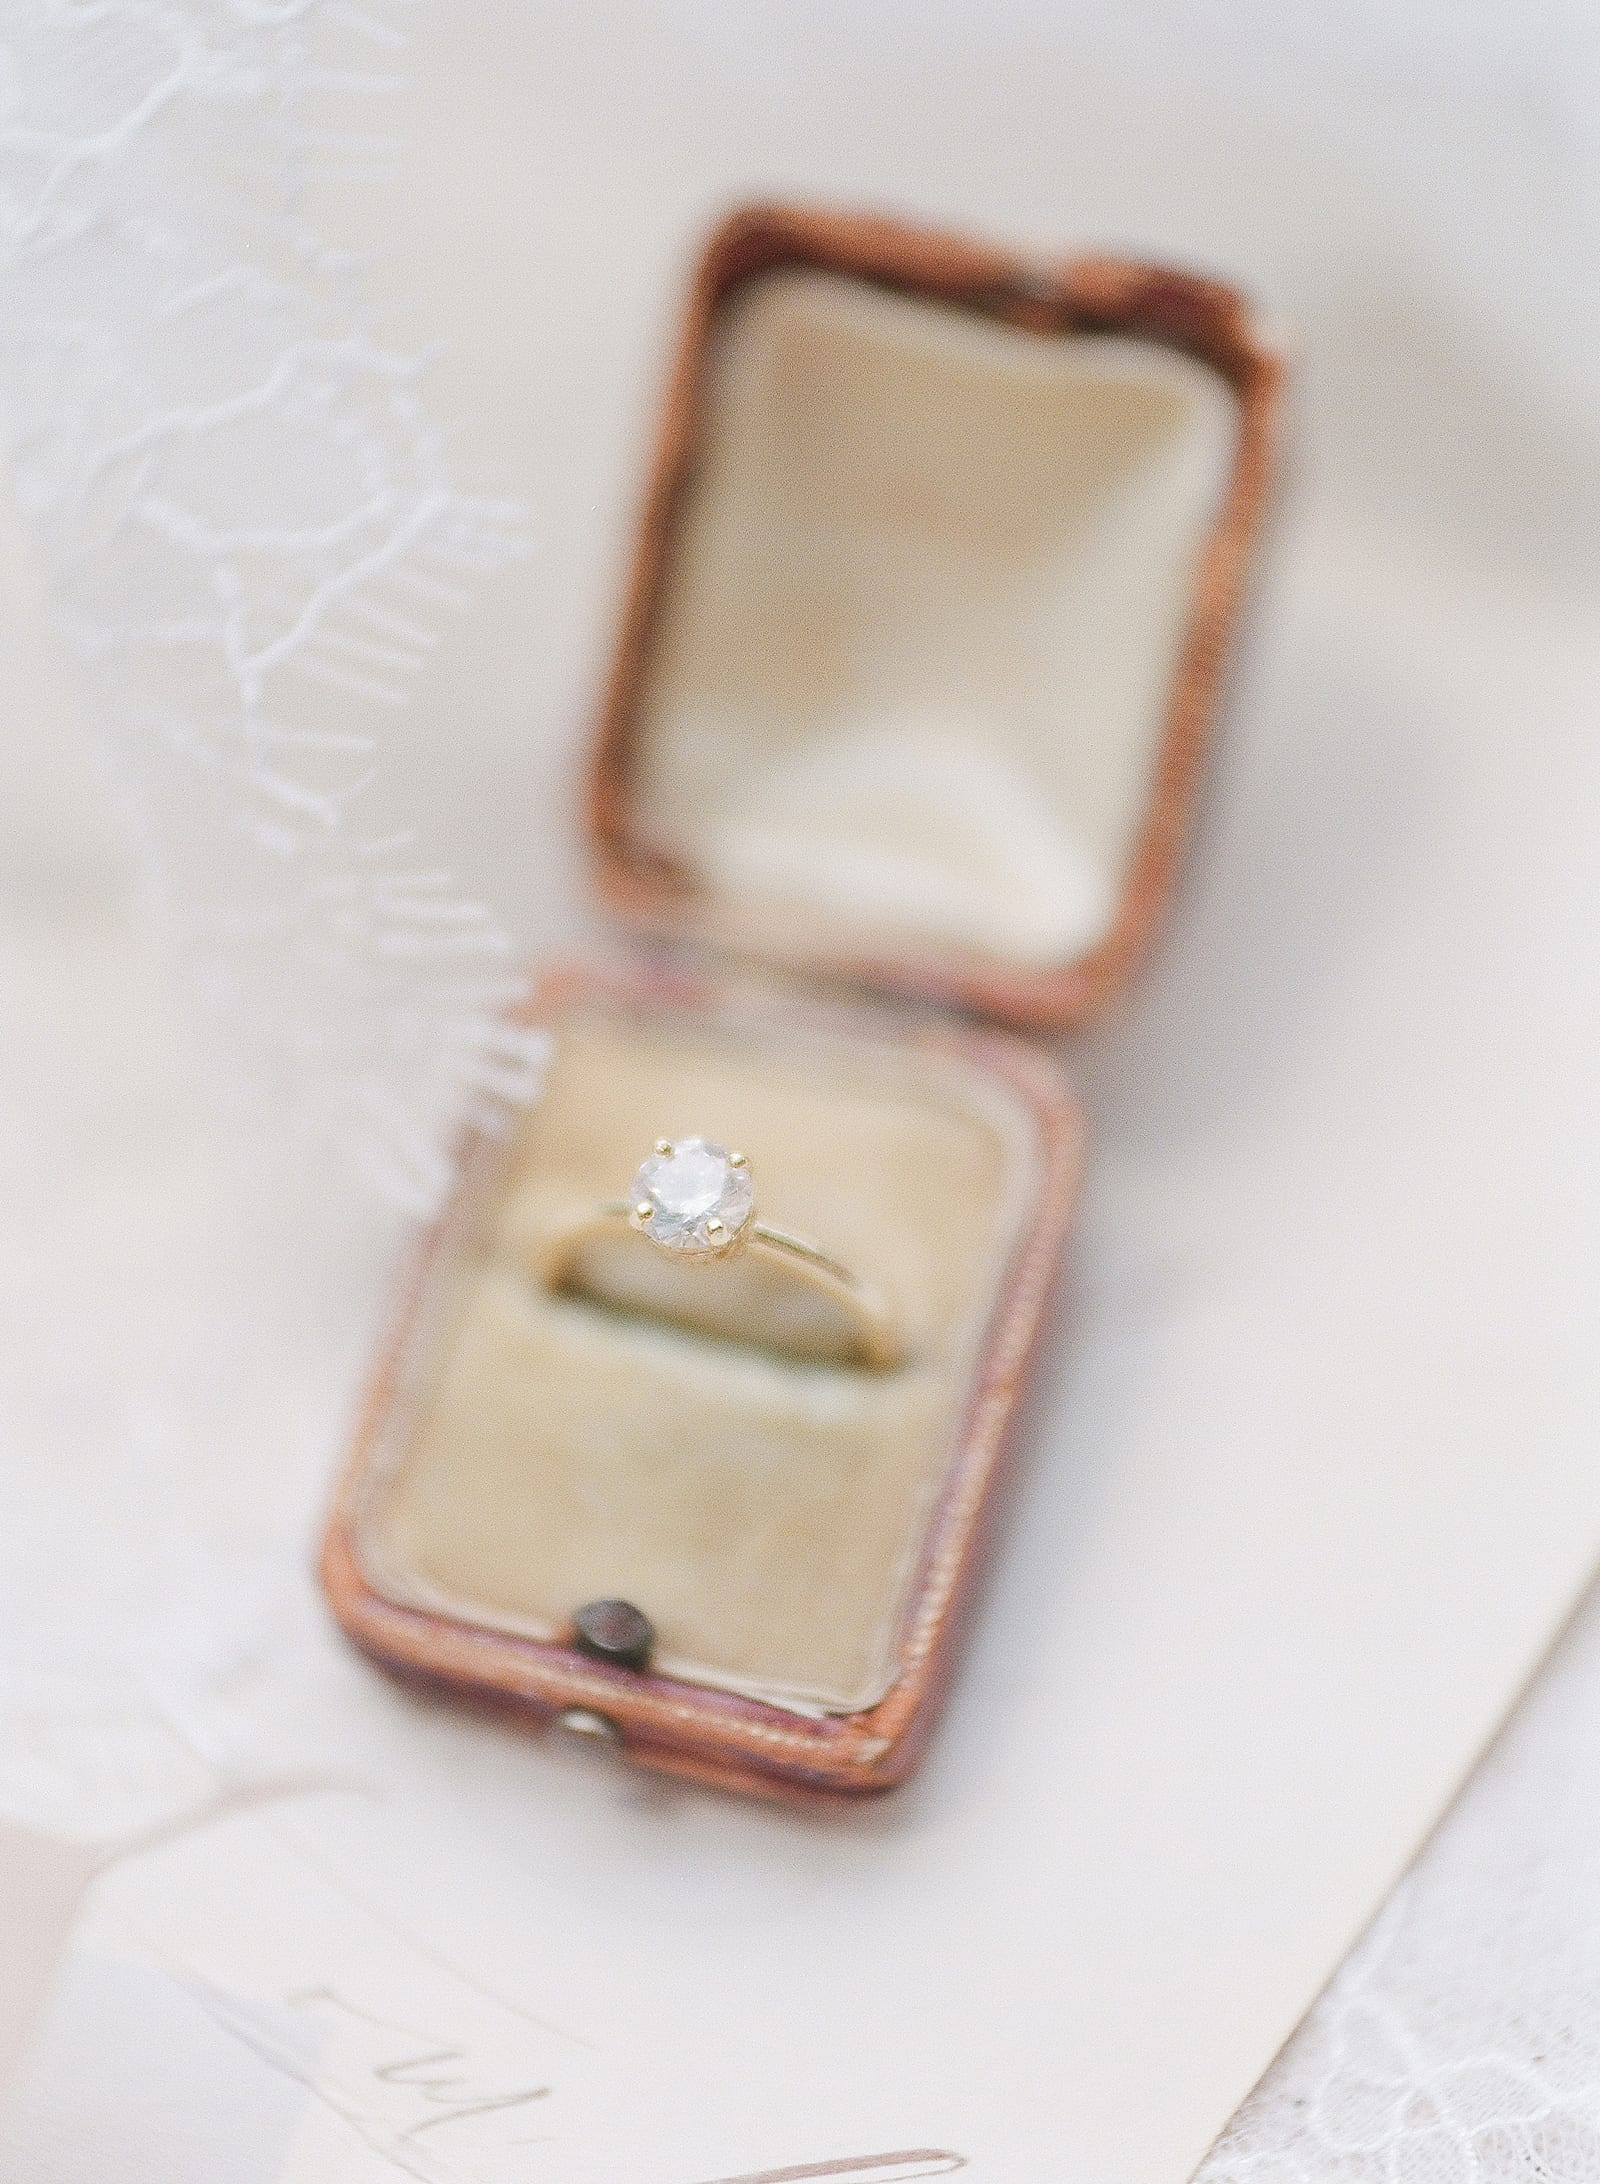 Engagement Ring in Vintage Box Photo